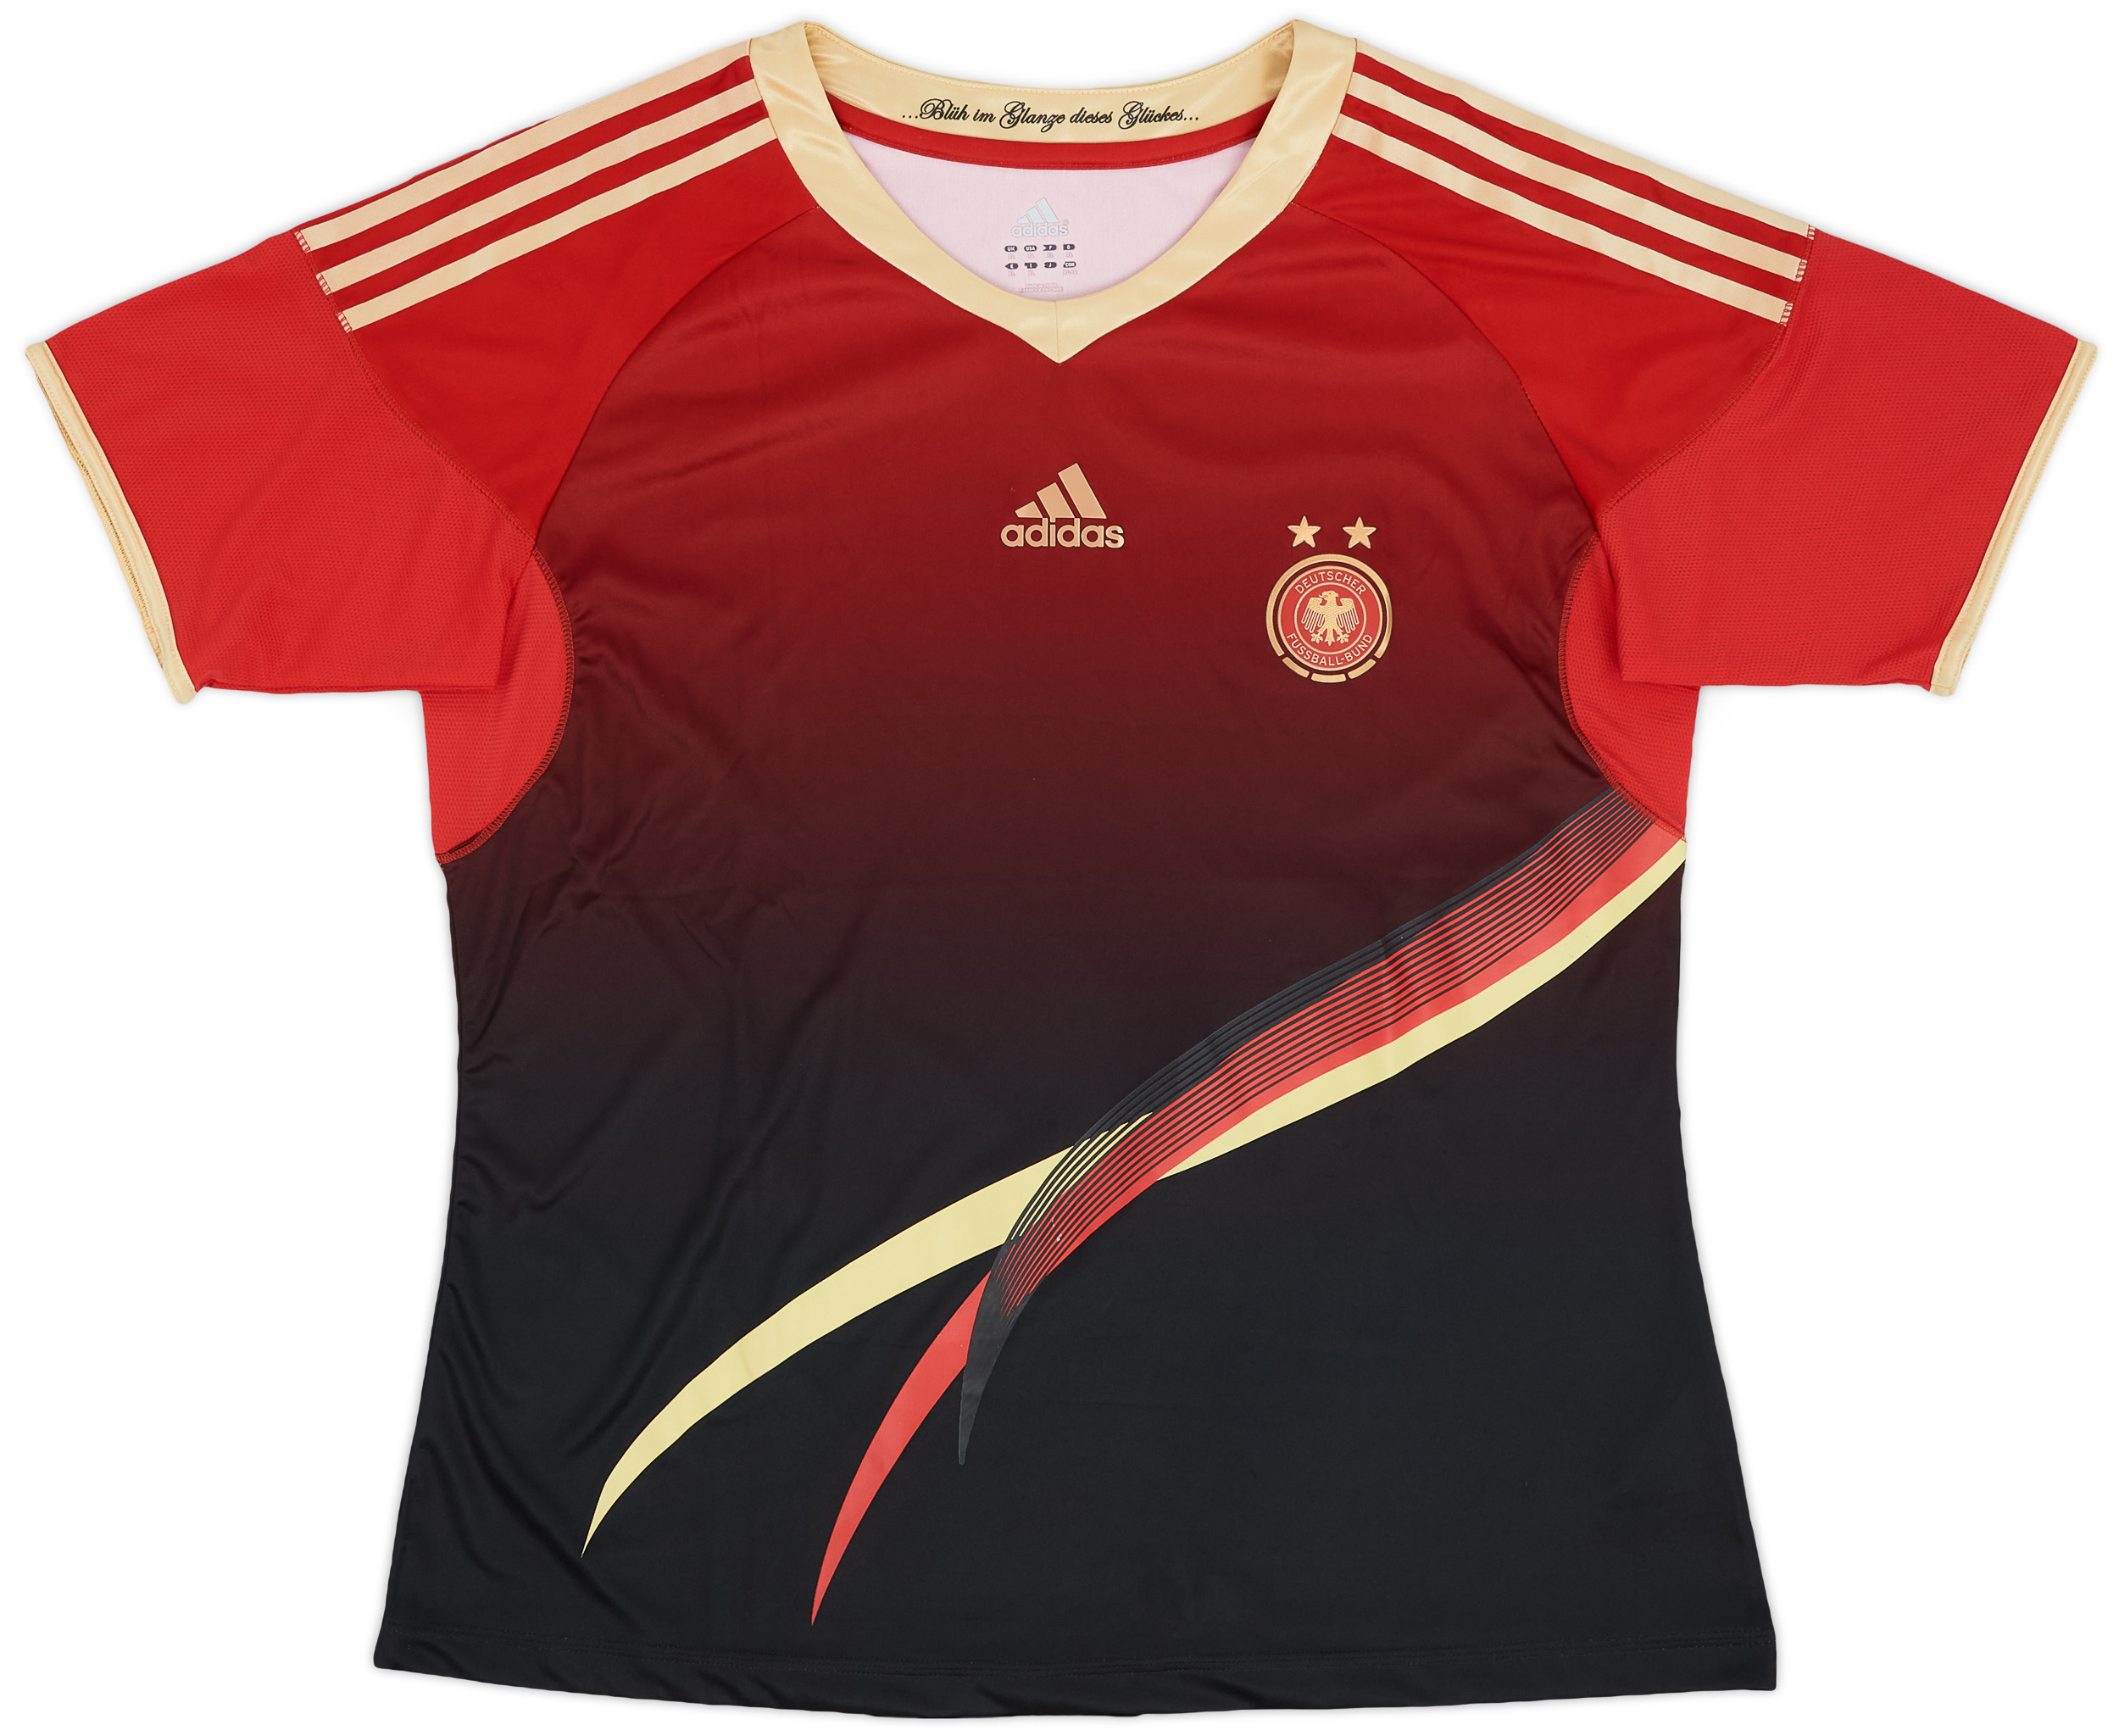 2011-12 Germany Women's Player Issue Away Shirt ()